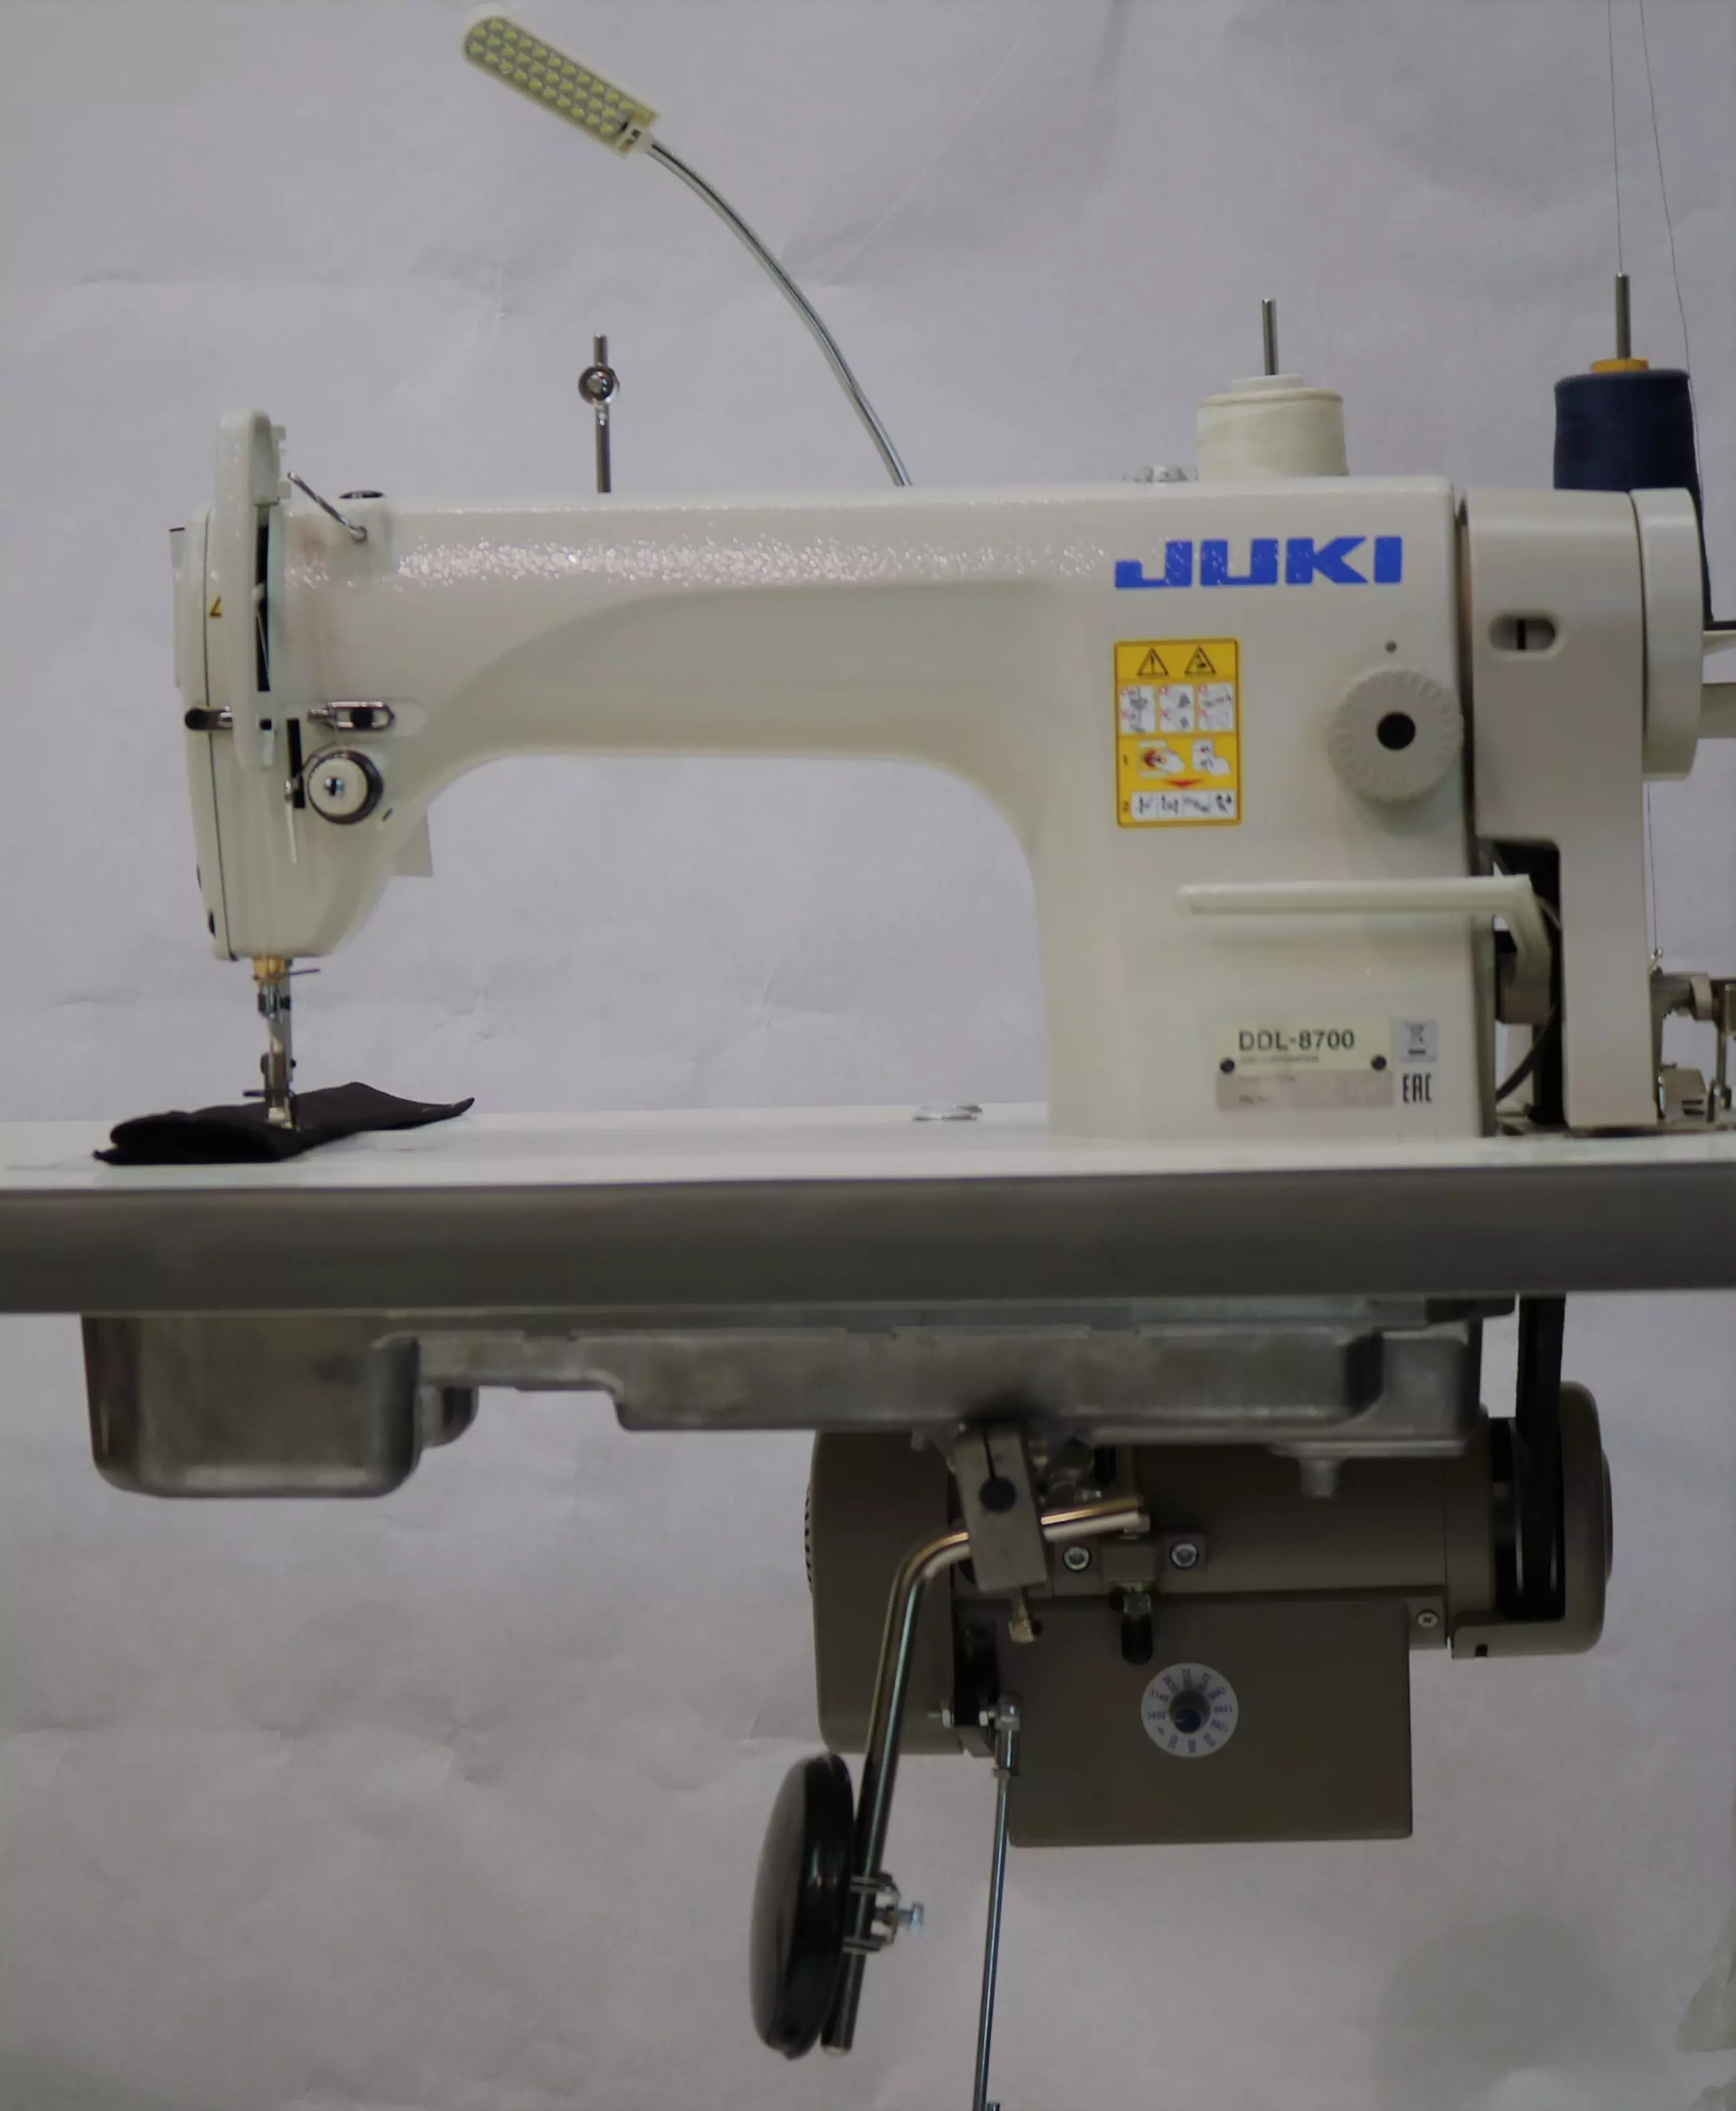 Industrial Sewing Machine, Heavy Duty Sewing Machine DDL-8700, Commercial  Sewing Machine with Automatic Bobbin Winder, Professional Electric Sewing